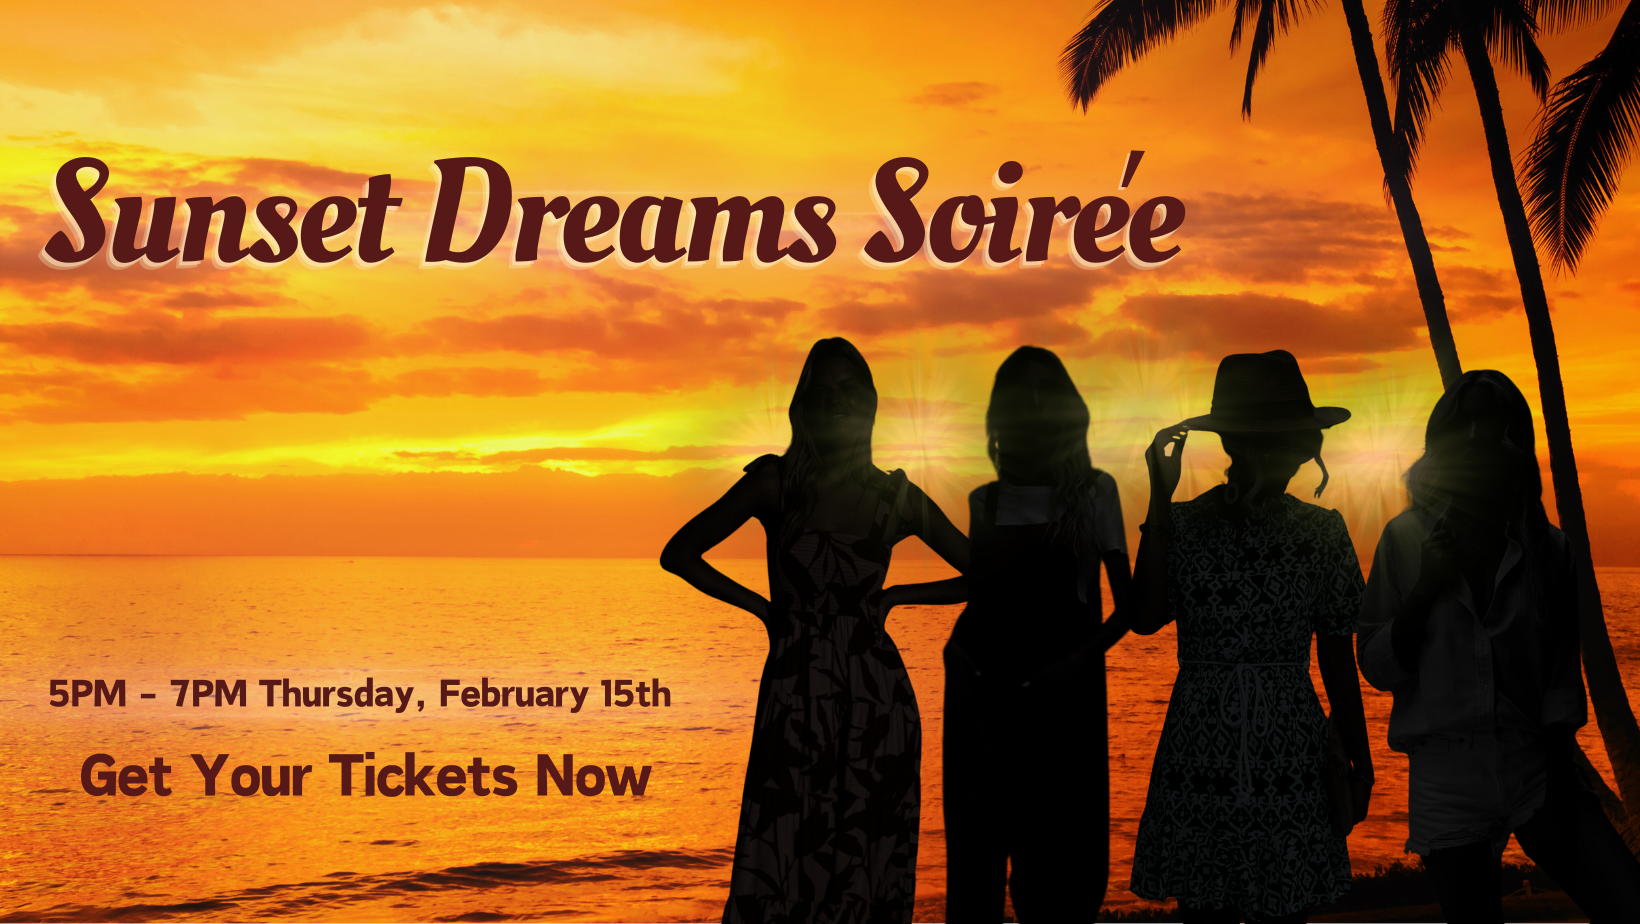 Sunset Dreams Soiree Tickets